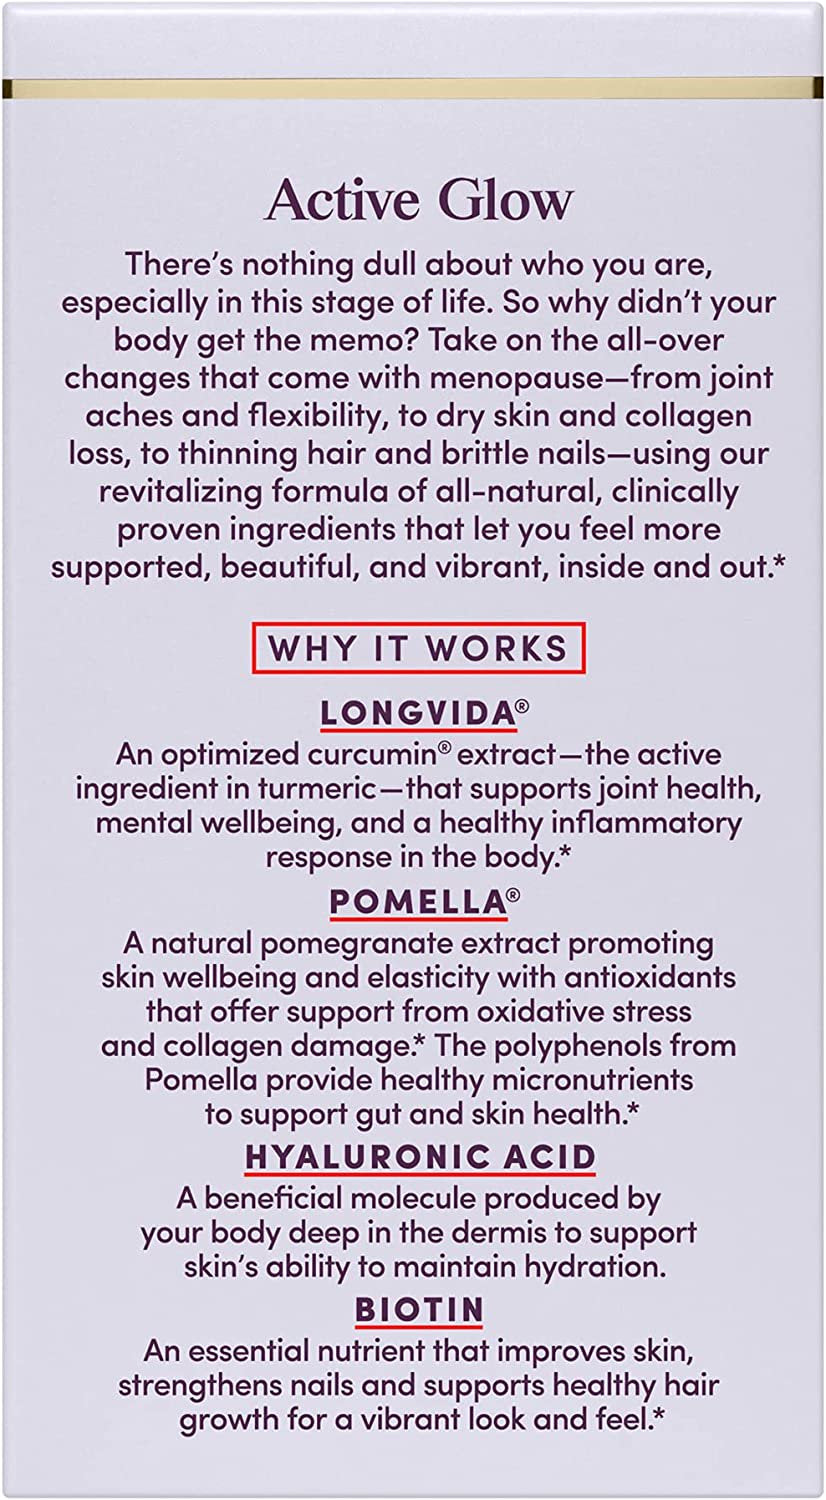 Womaness Active Glow - All over Menopause Support for Hair Skin and Nails Vitamins & Joint Health - Longvida Curcumin, Pomegranate Extract, Hyaluronic Acid + Biotin Menopause Supplements (30 Capsules)